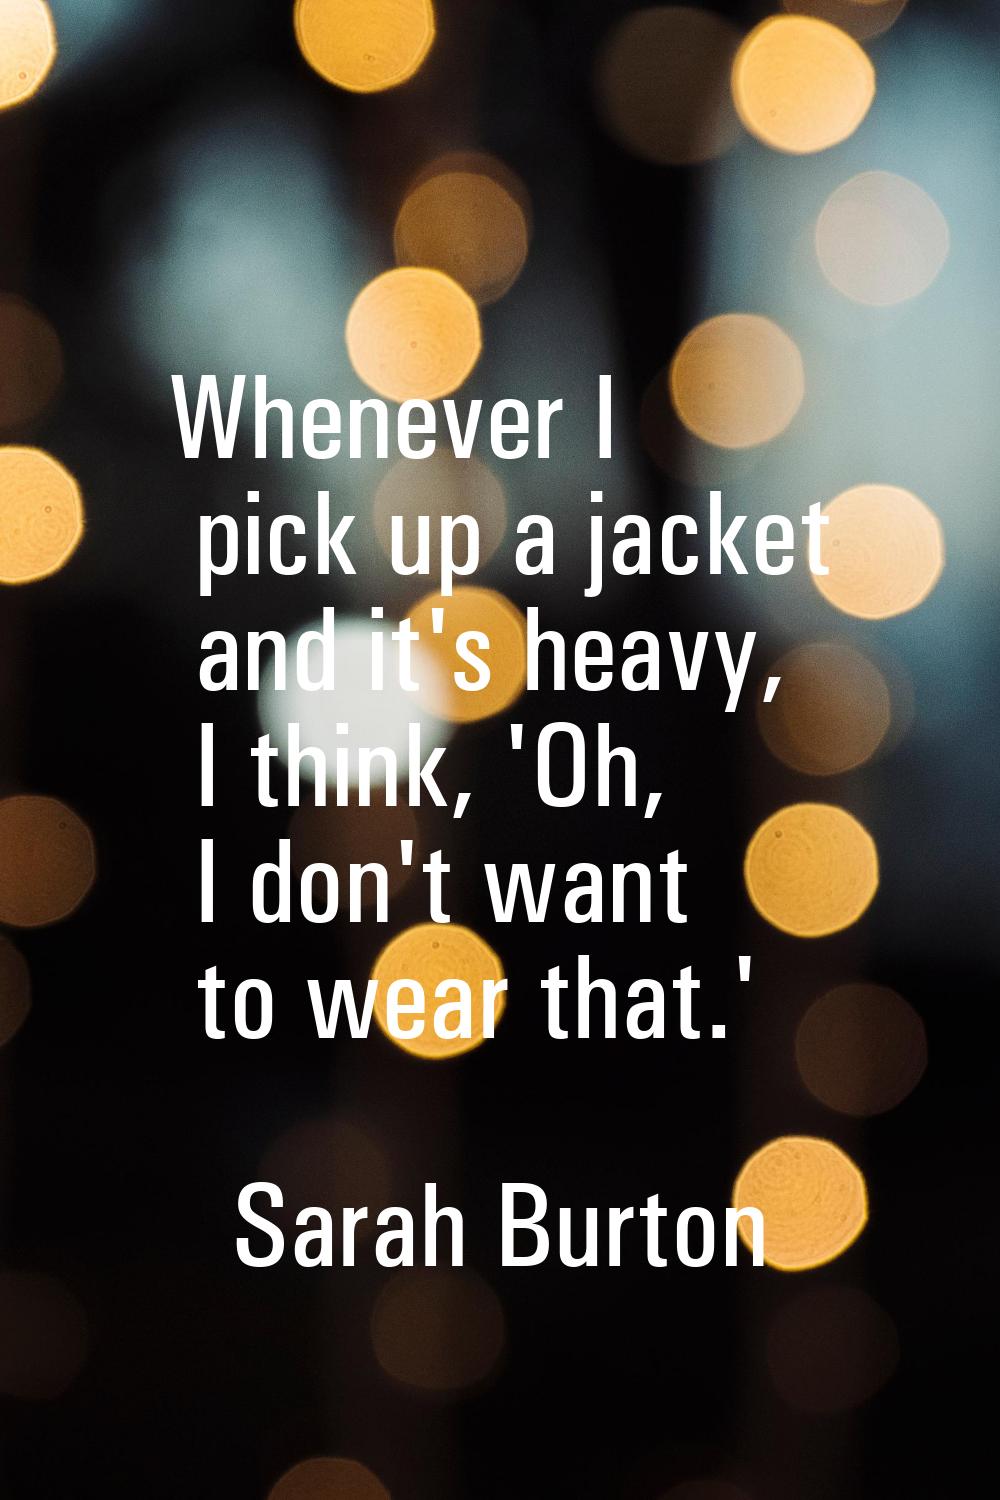 Whenever I pick up a jacket and it's heavy, I think, 'Oh, I don't want to wear that.'